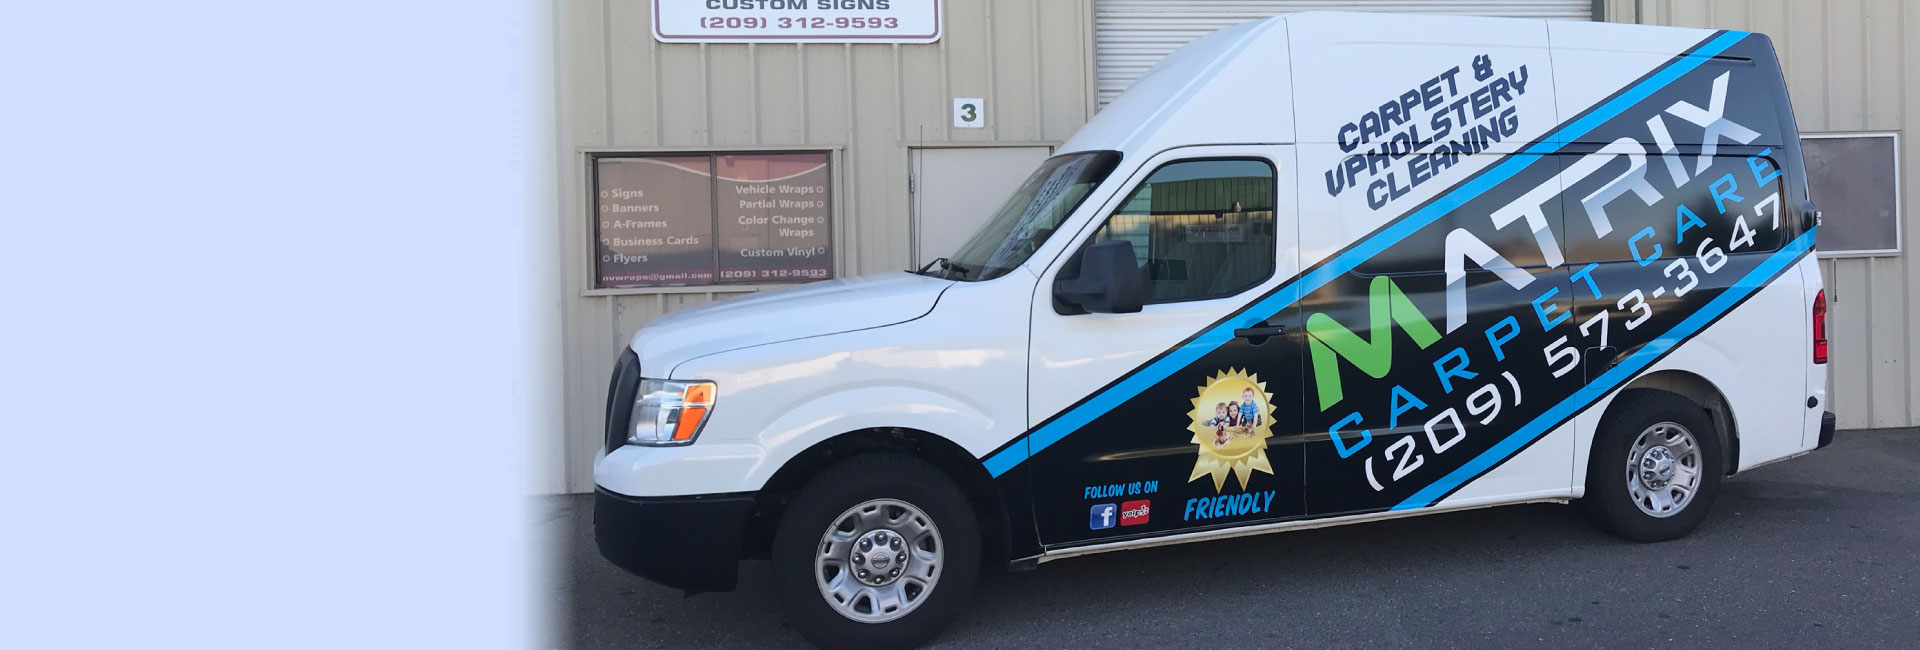 Vehicle Wraps | Signs | Commercial | Nv Wraps | 209.244.0628